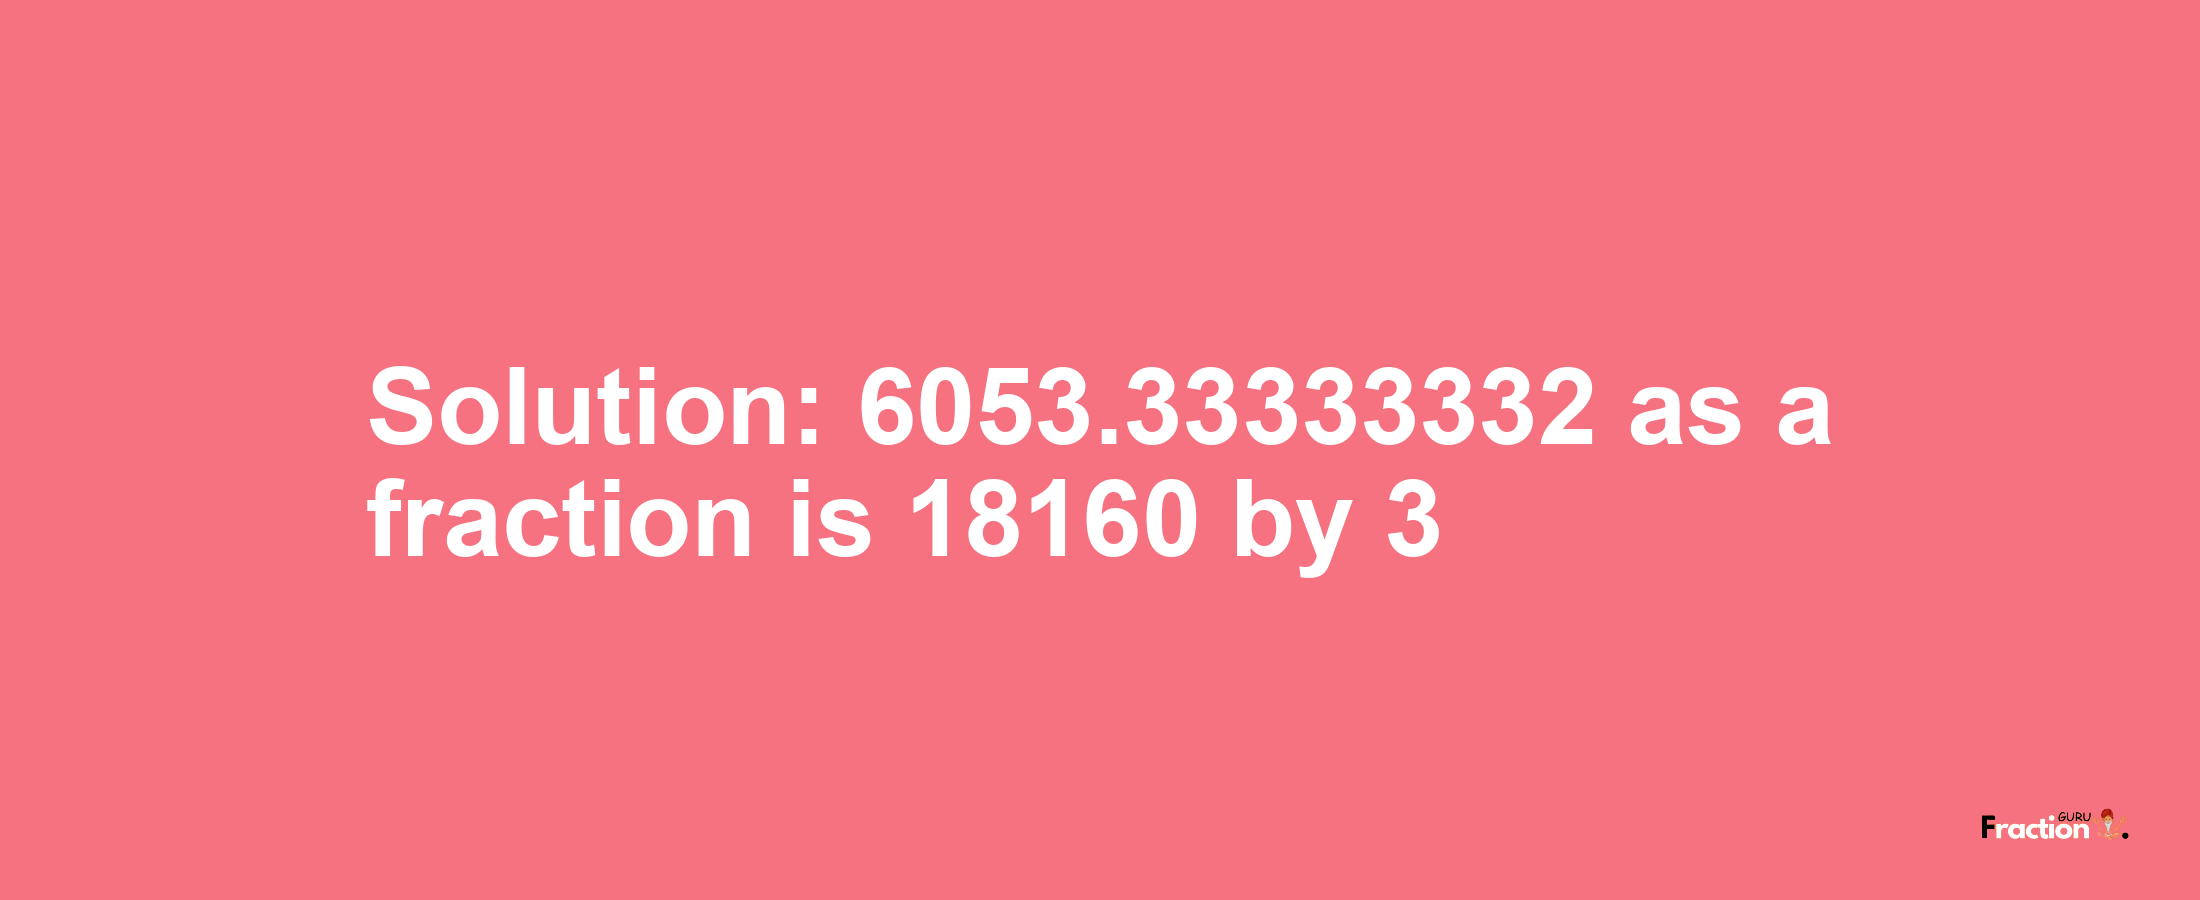 Solution:6053.33333332 as a fraction is 18160/3